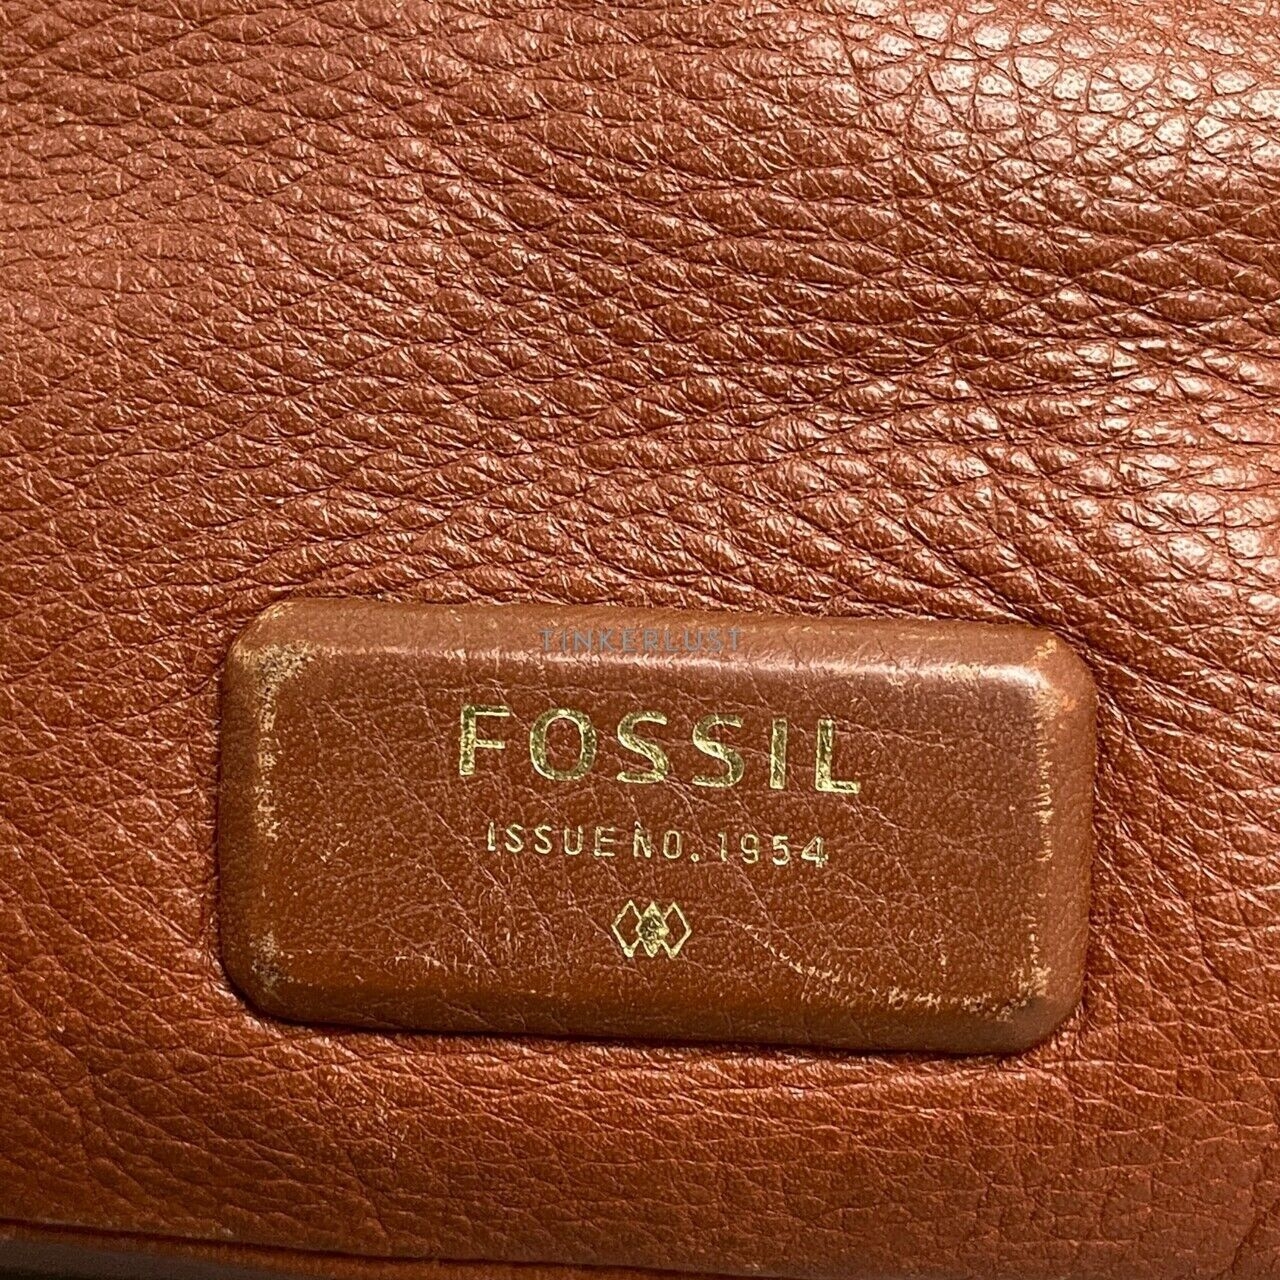 Fossil Brown Emerson Satchel